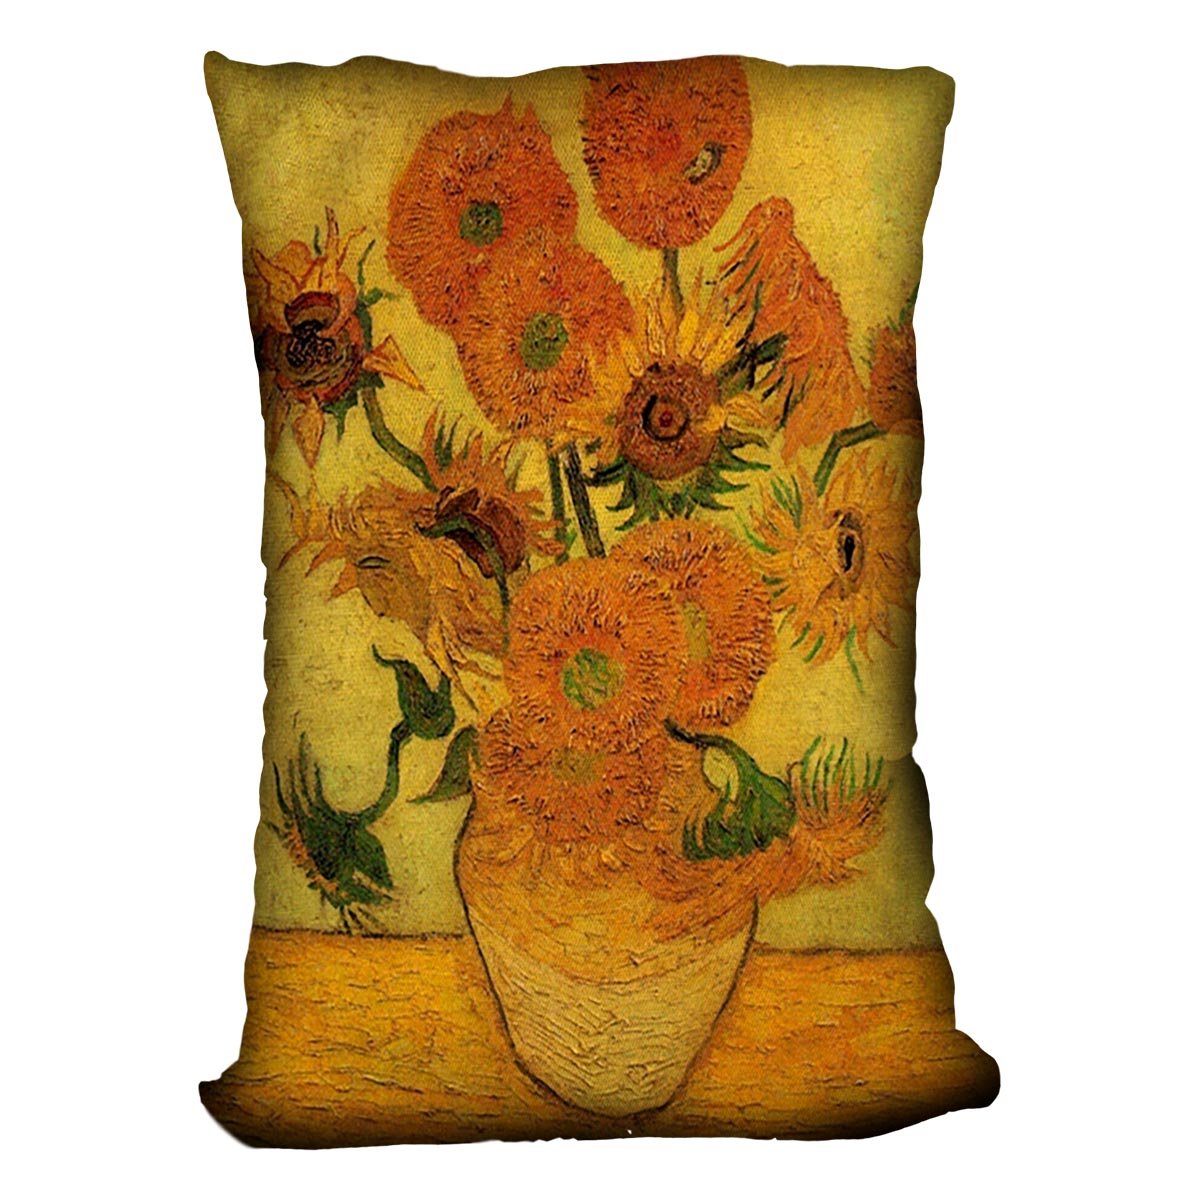 Still Life Vase with Fifteen Sunflowers 2 by Van Gogh Throw Pillow